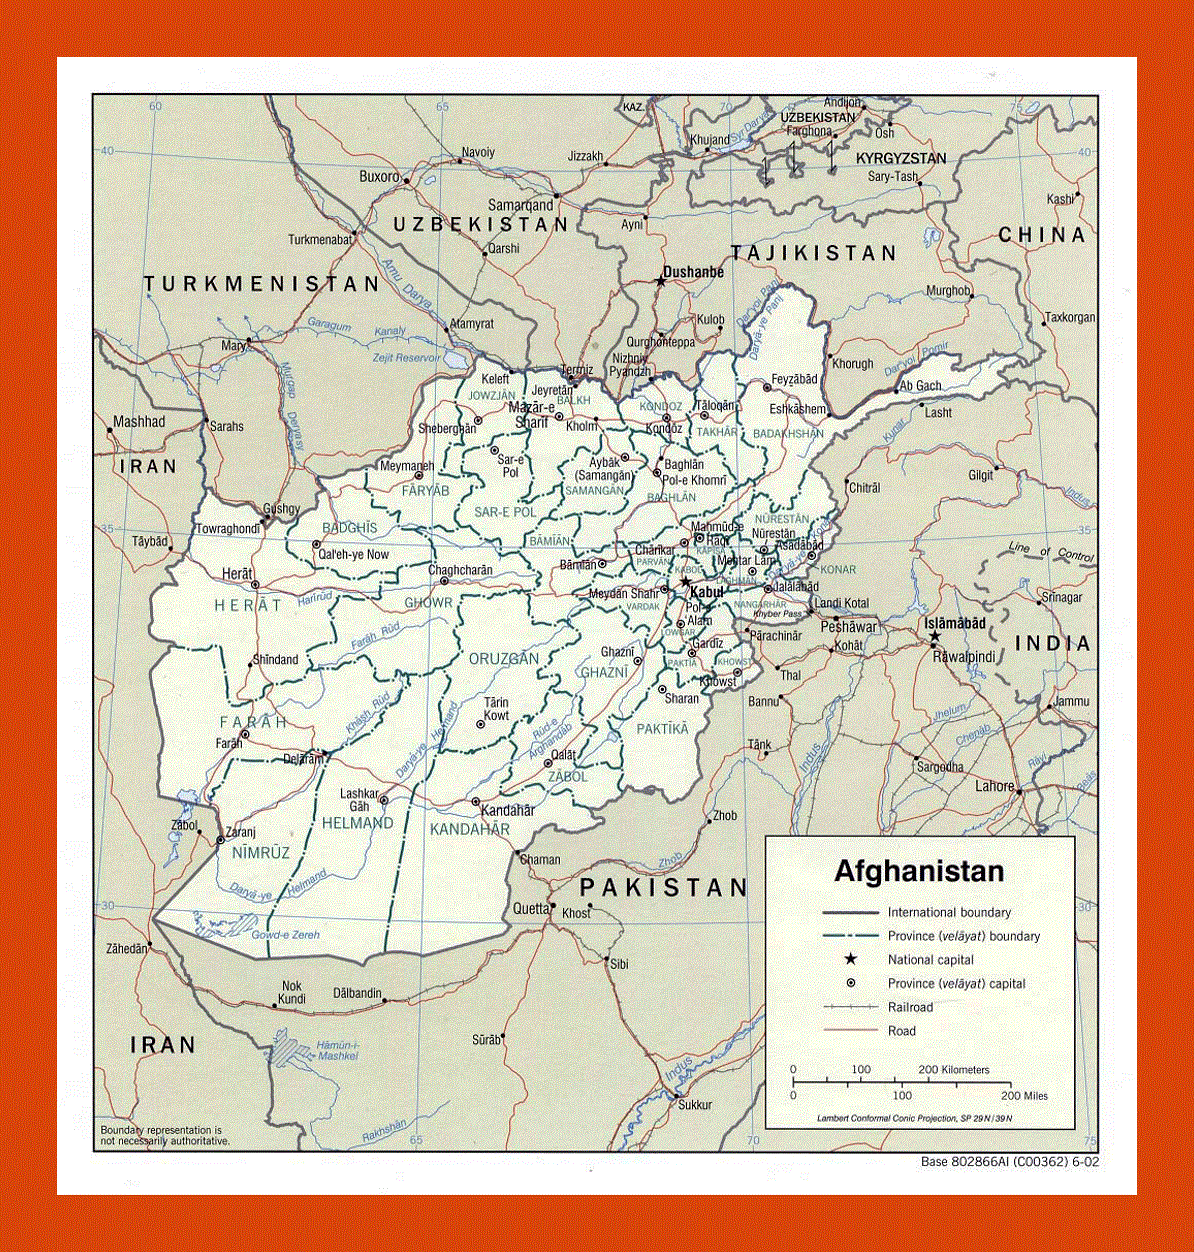 Political and administrative map of Afghanistan - 2002